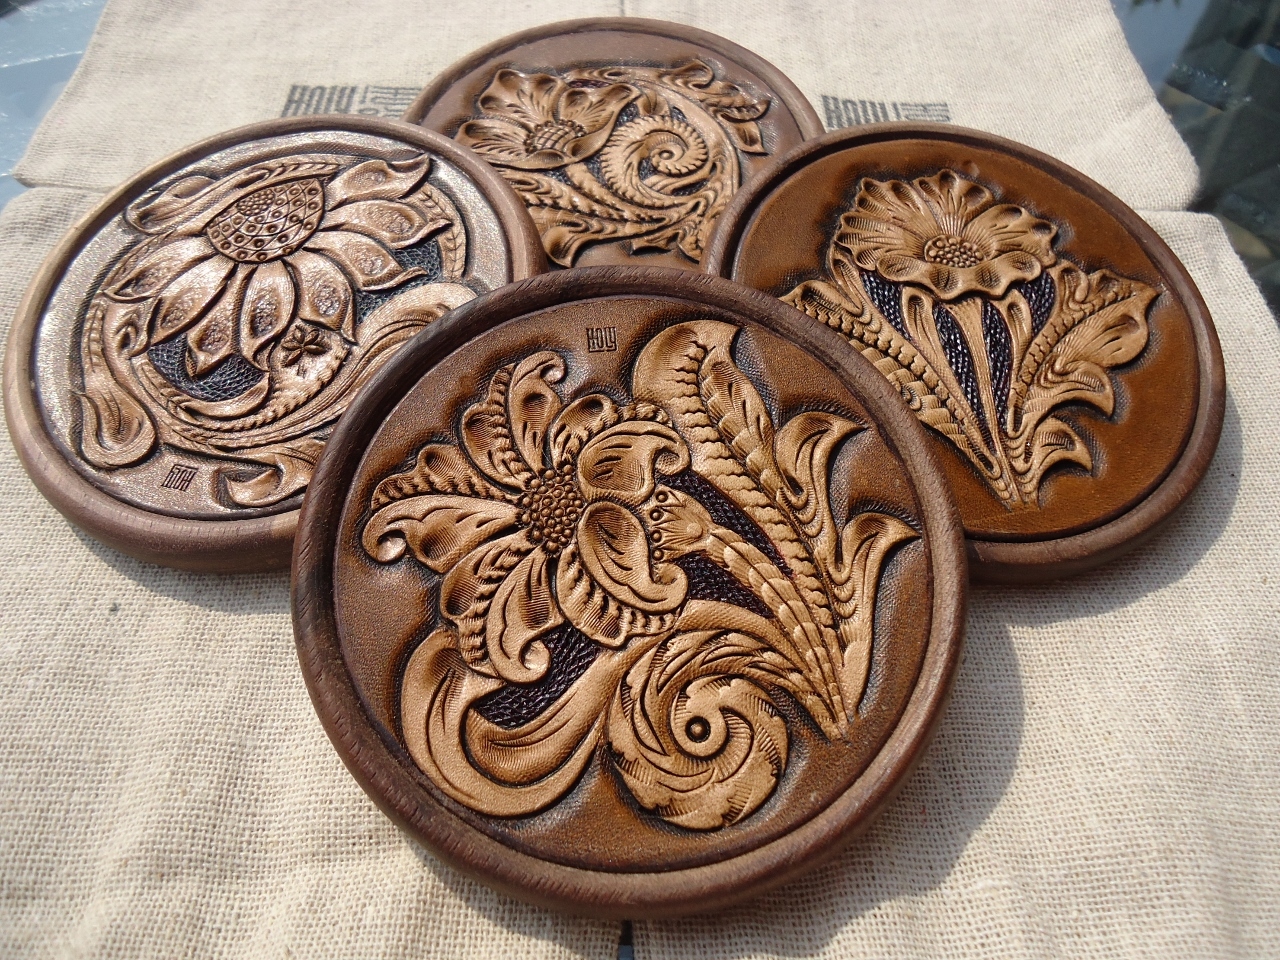 <p>Yu Family 'Holy' Leather and Wood Coaster</p>